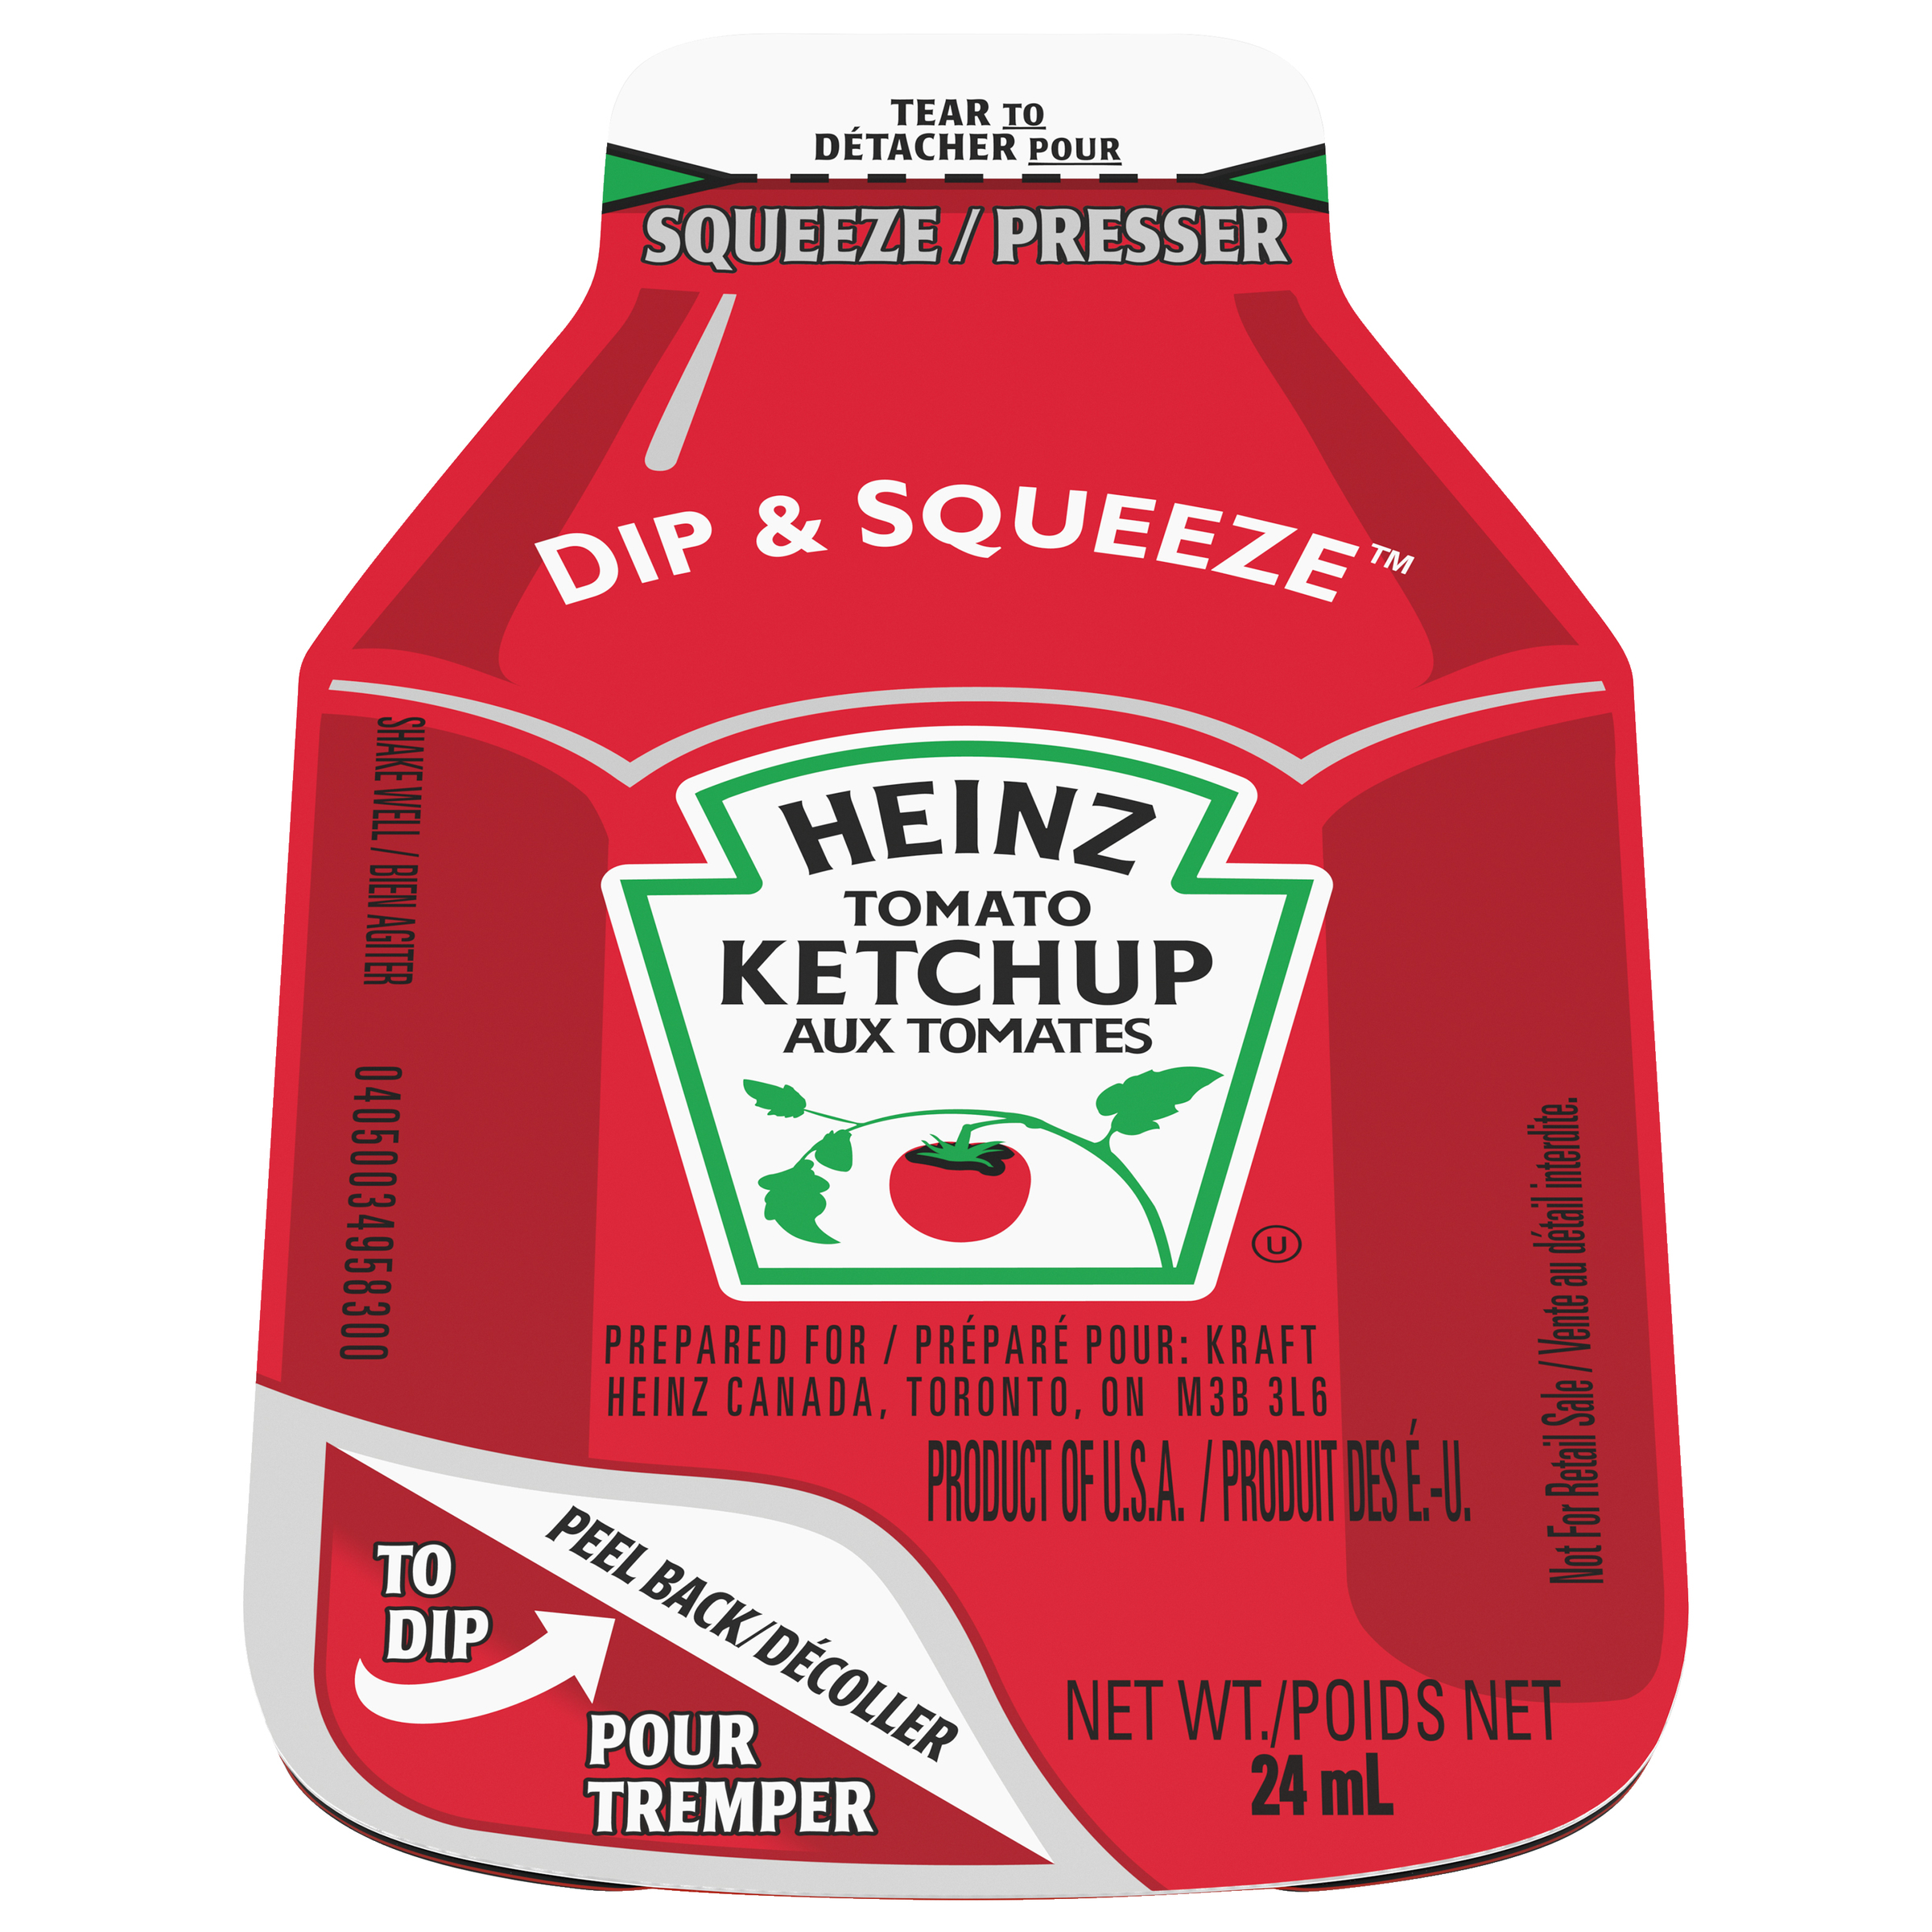 HEINZ Ketchup Tomato Dip & Squeeze 24ml 300